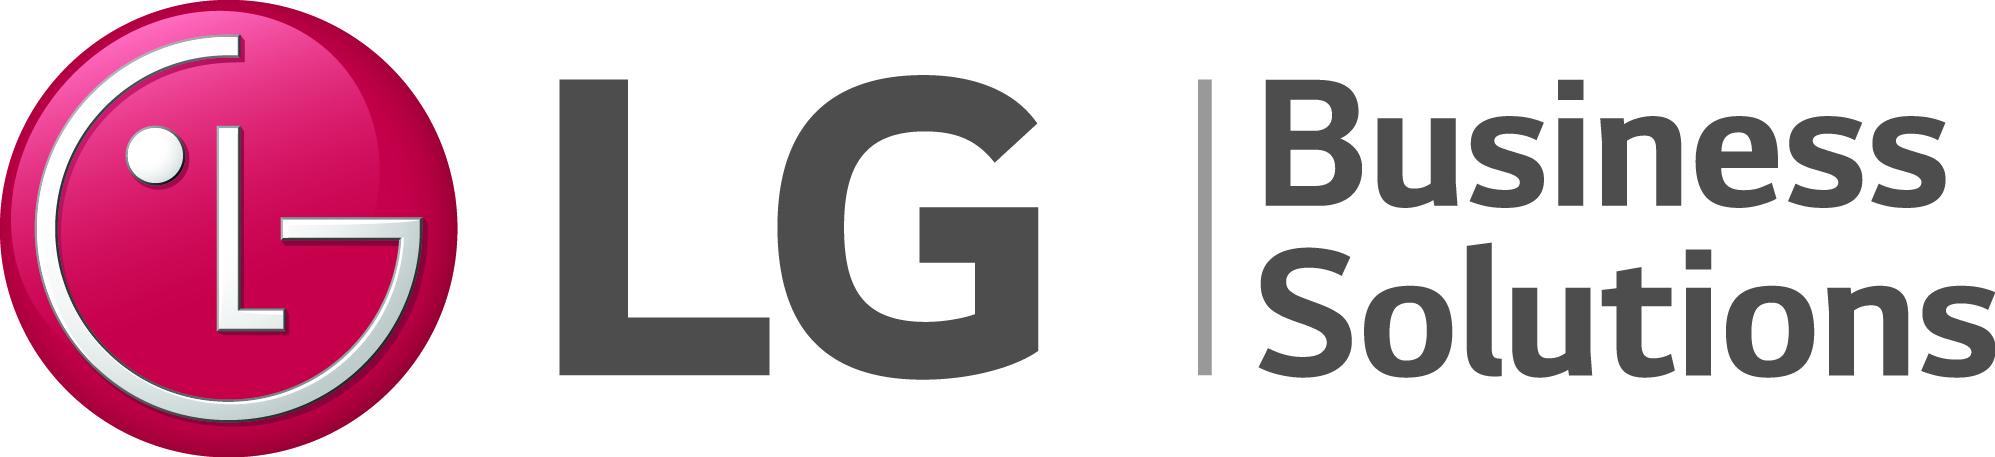 LG Business Solutions_logo - NSCA